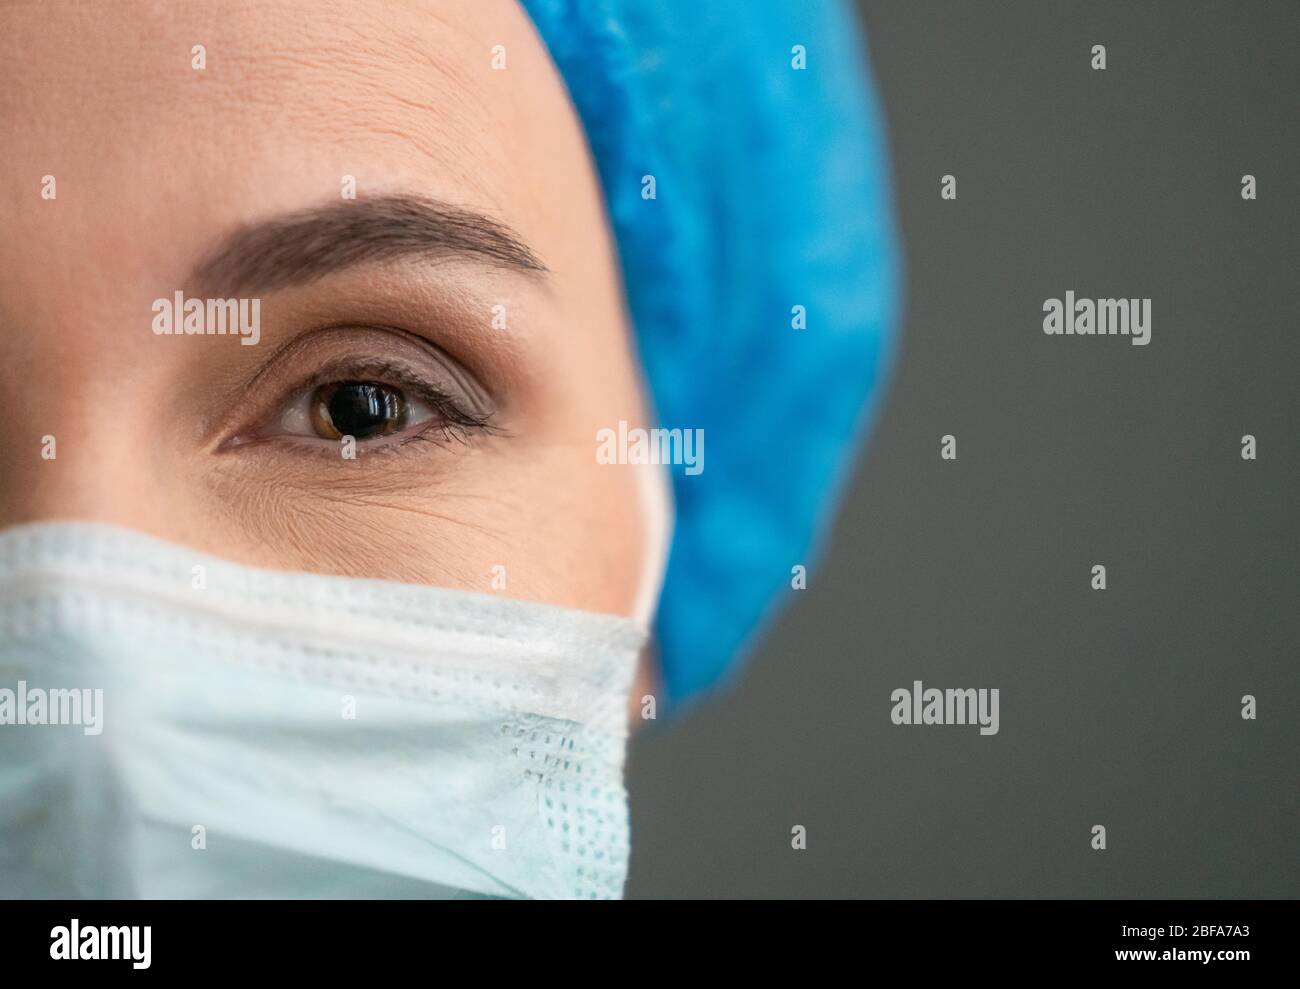 Woman's eye In Protective Mask Looking At Camera Stock Photo